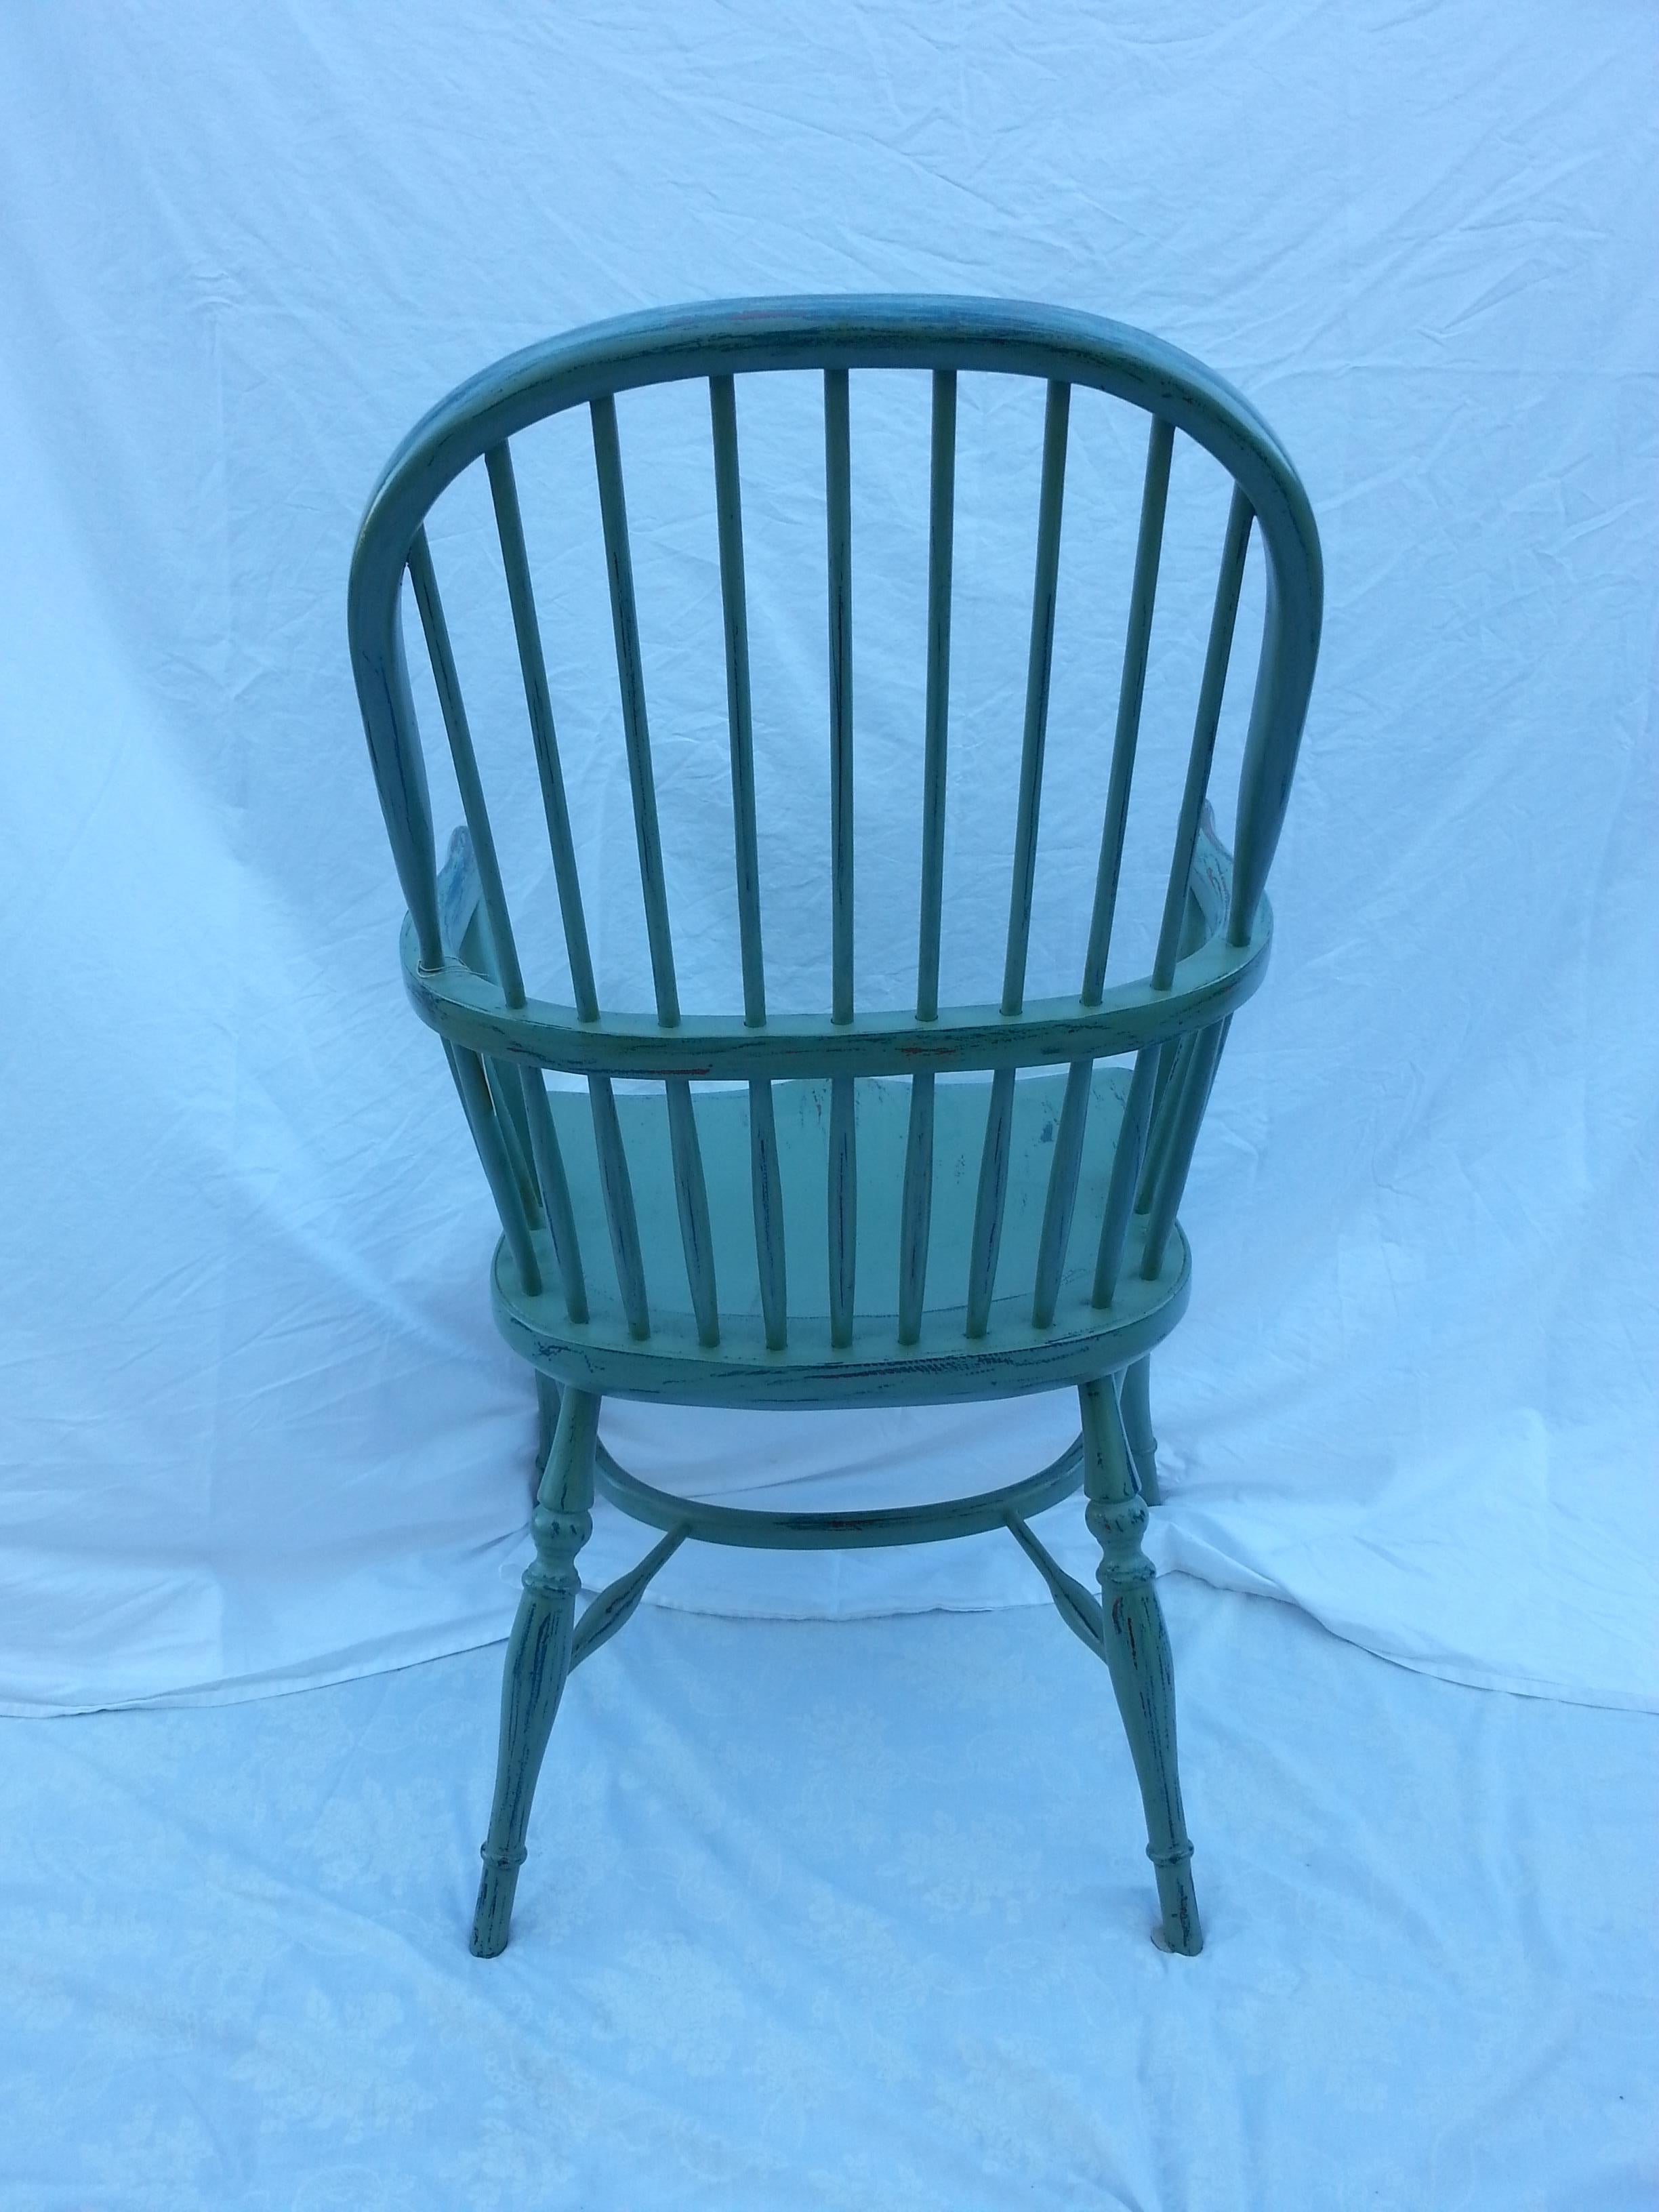 Reproduction spindle back powder blue armchair.